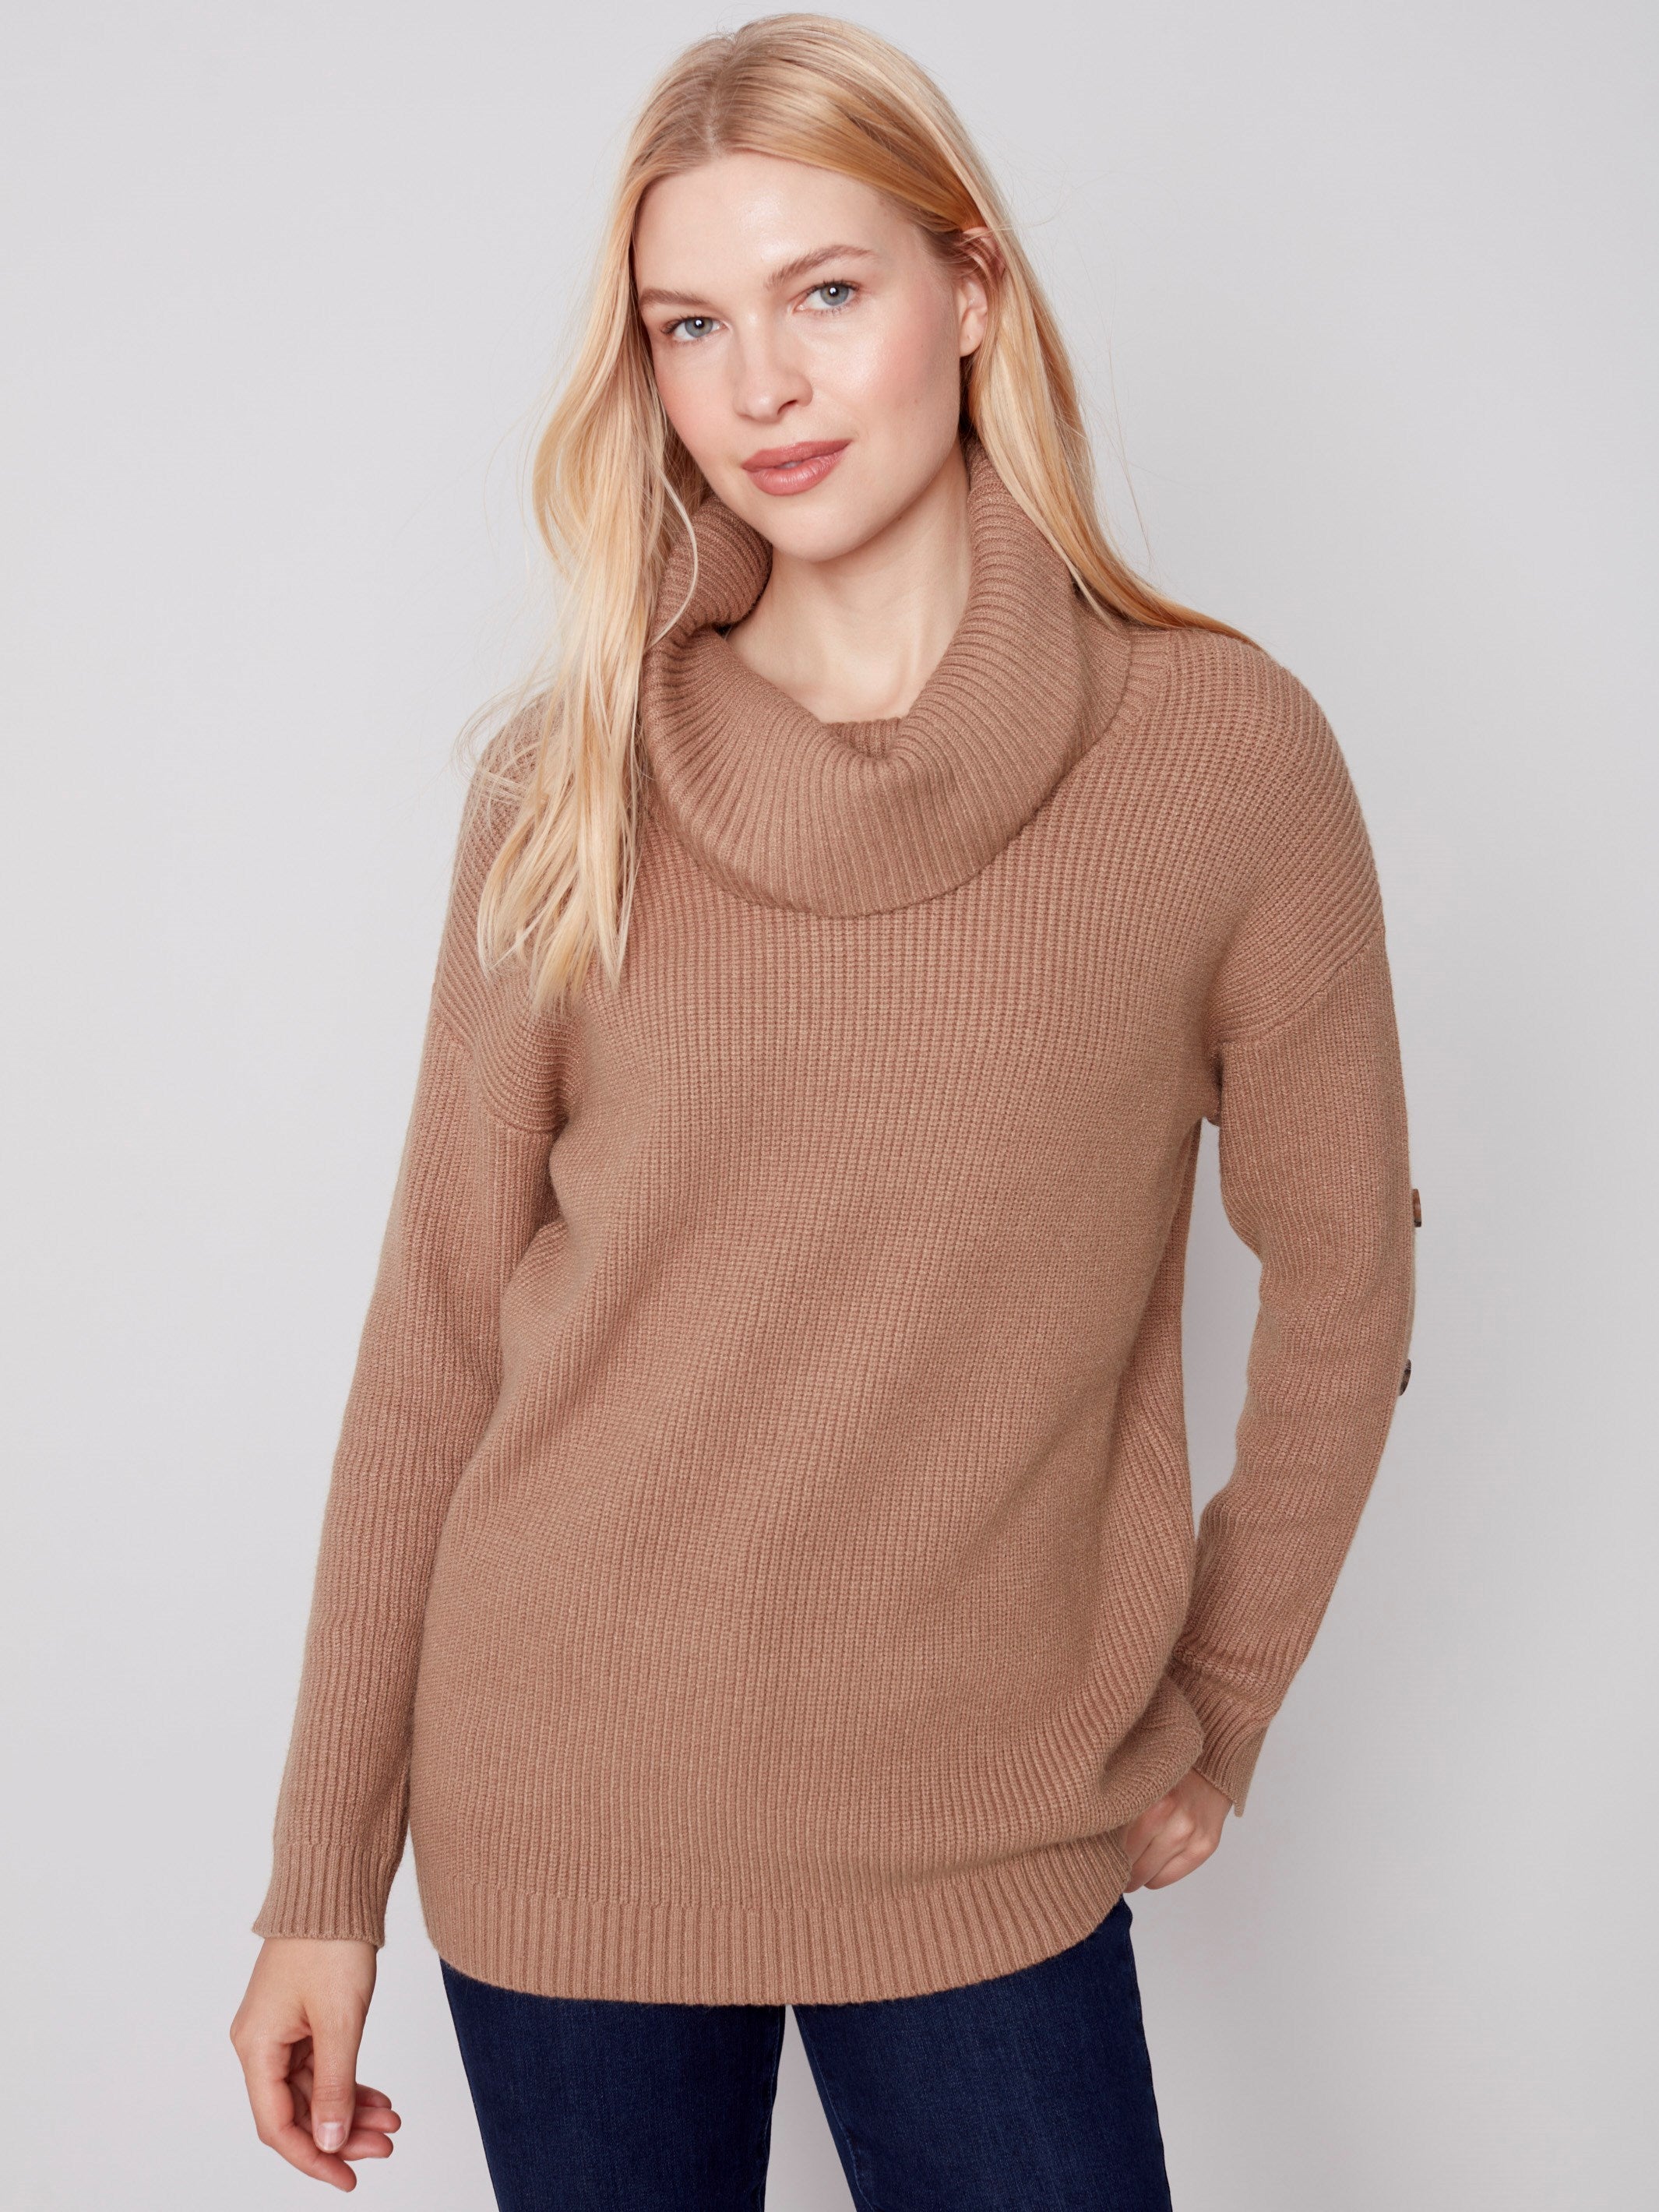 Cowl Neck Sweater with Button Detail - Truffle